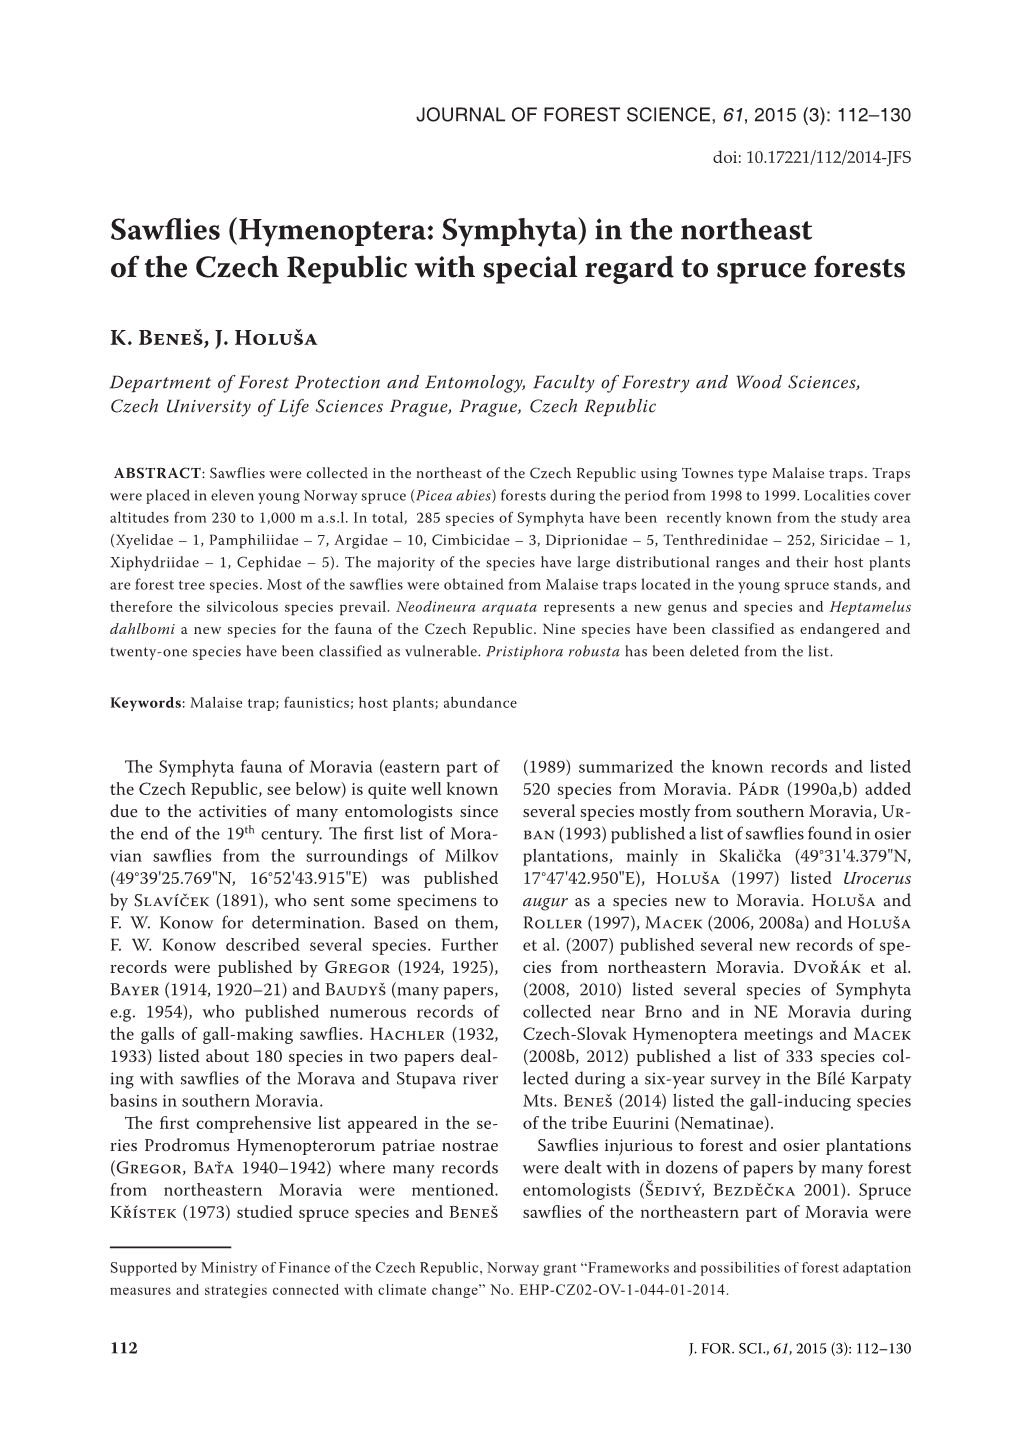 Sawflies (Hymenoptera: Symphyta) in the Northeast of the Czech Republic with Special Regard to Spruce Forests